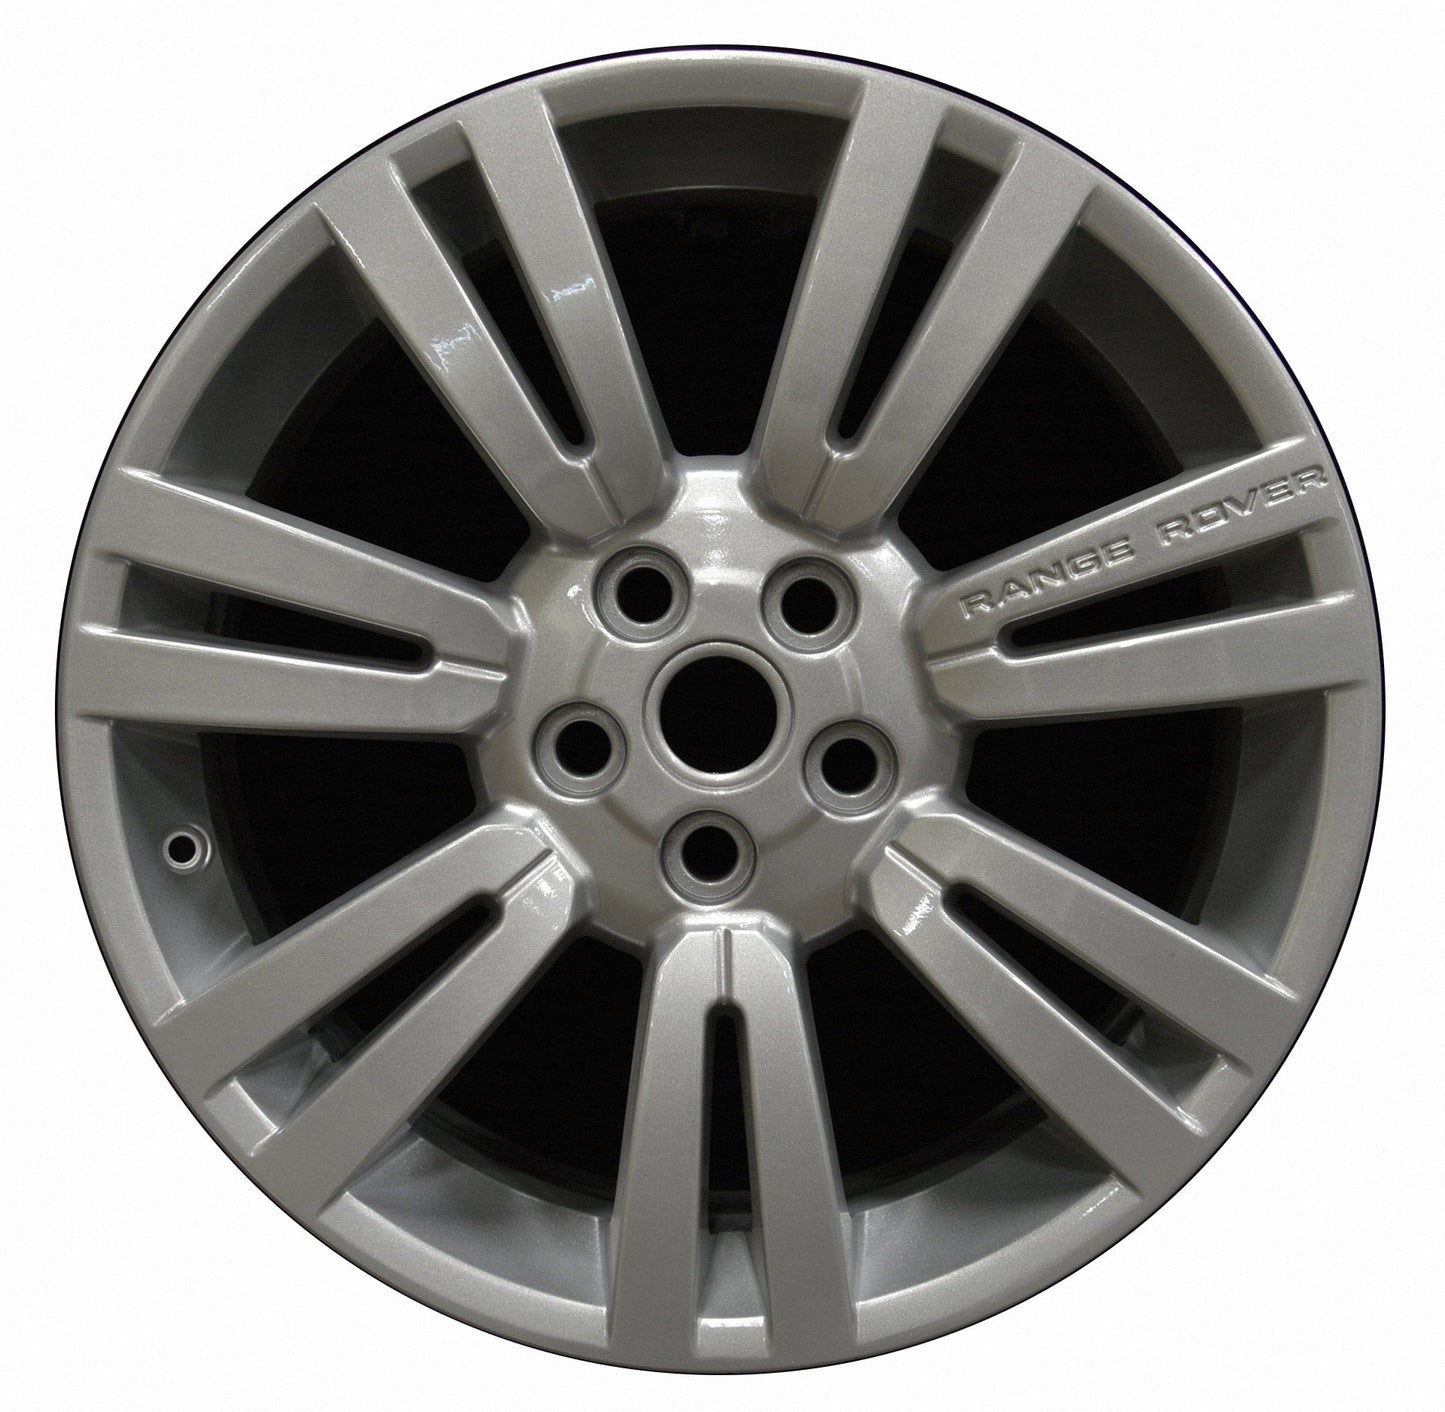 Land Rover Range Rover  2009, 2010, 2011, 2012 Factory OEM Car Wheel Size 20x8.5 Alloy WAO.72213.PS08.FF